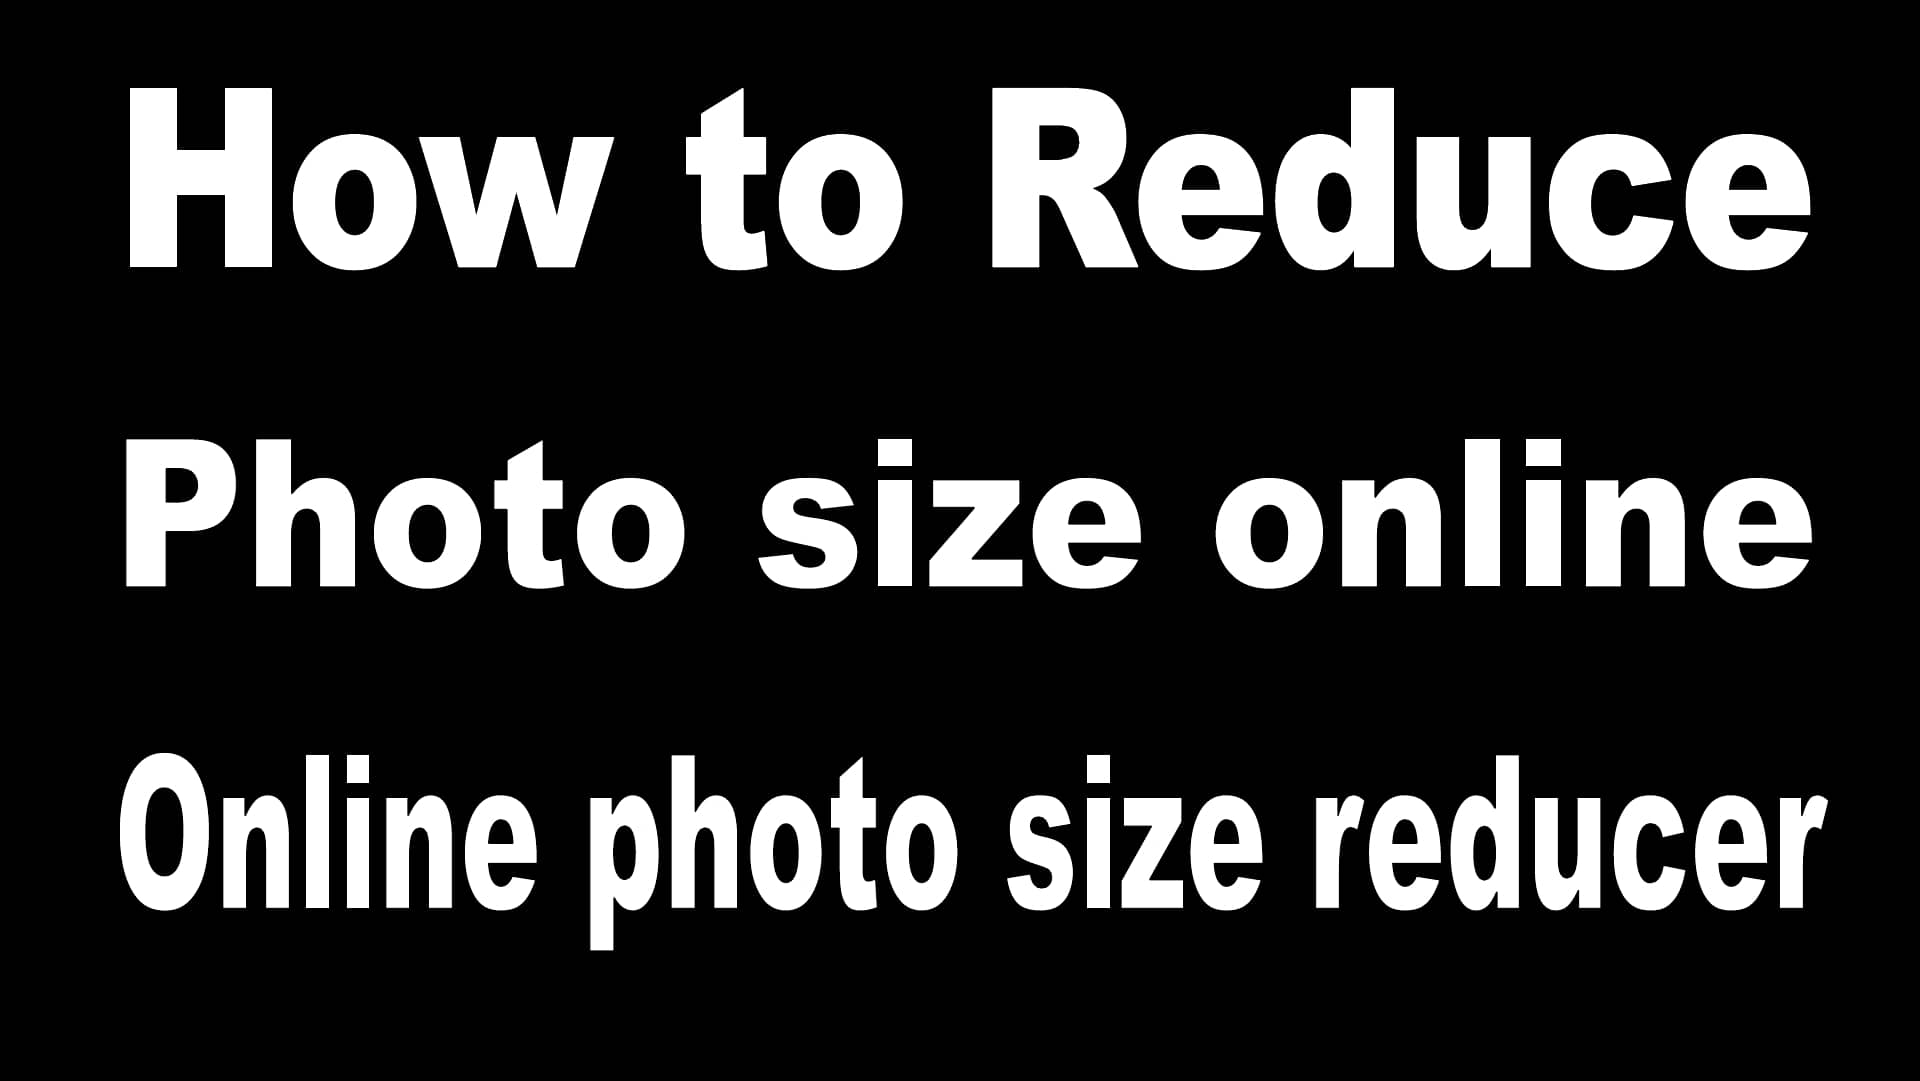 How to reduce photo size online | Online photo size reducer